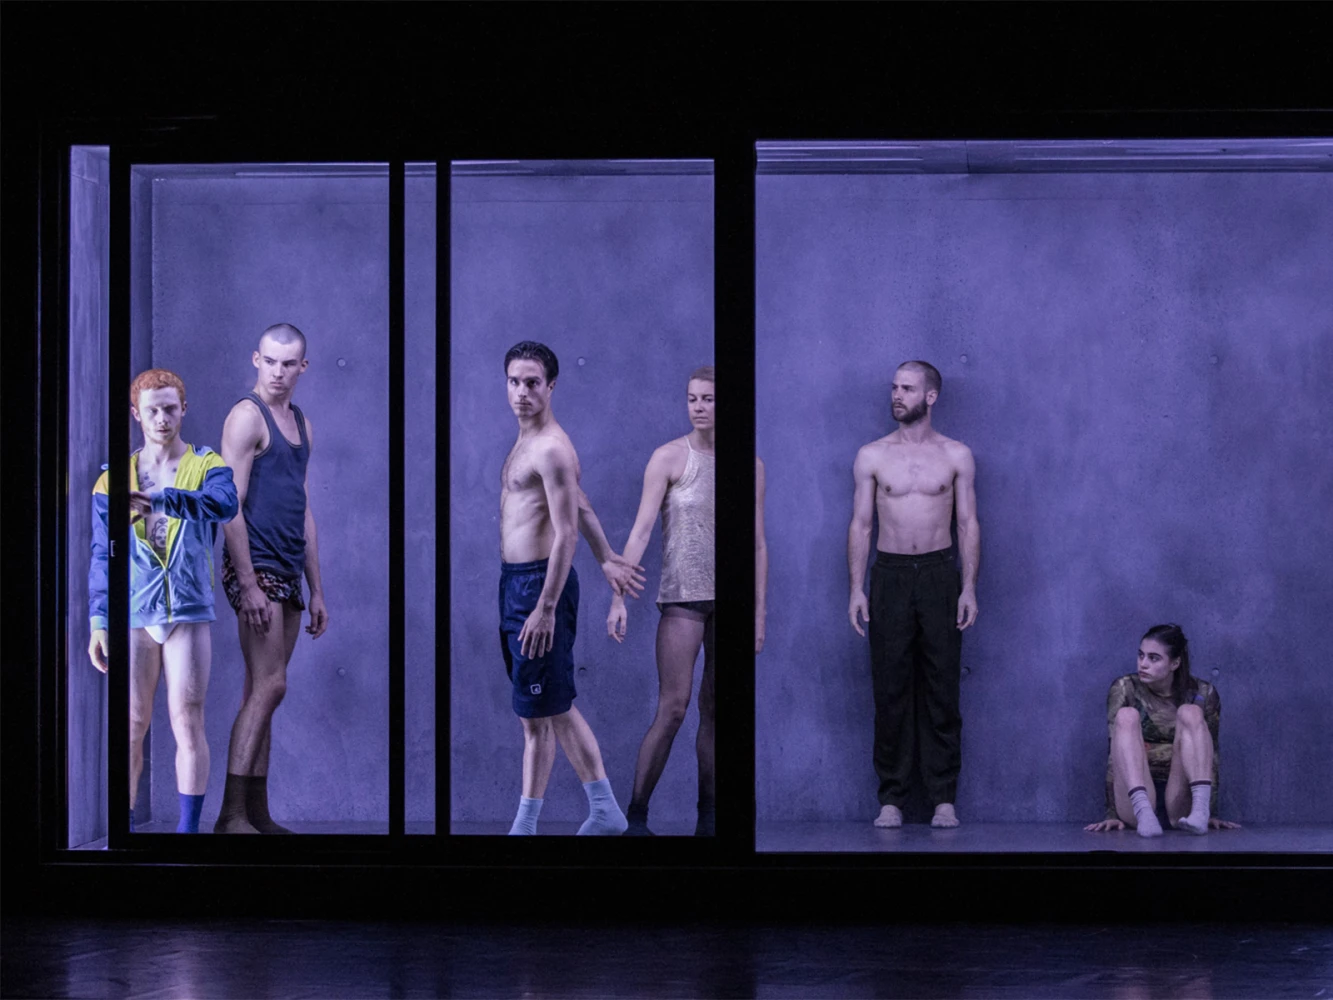 Resound at Sydney Dance Company: What to expect - 4